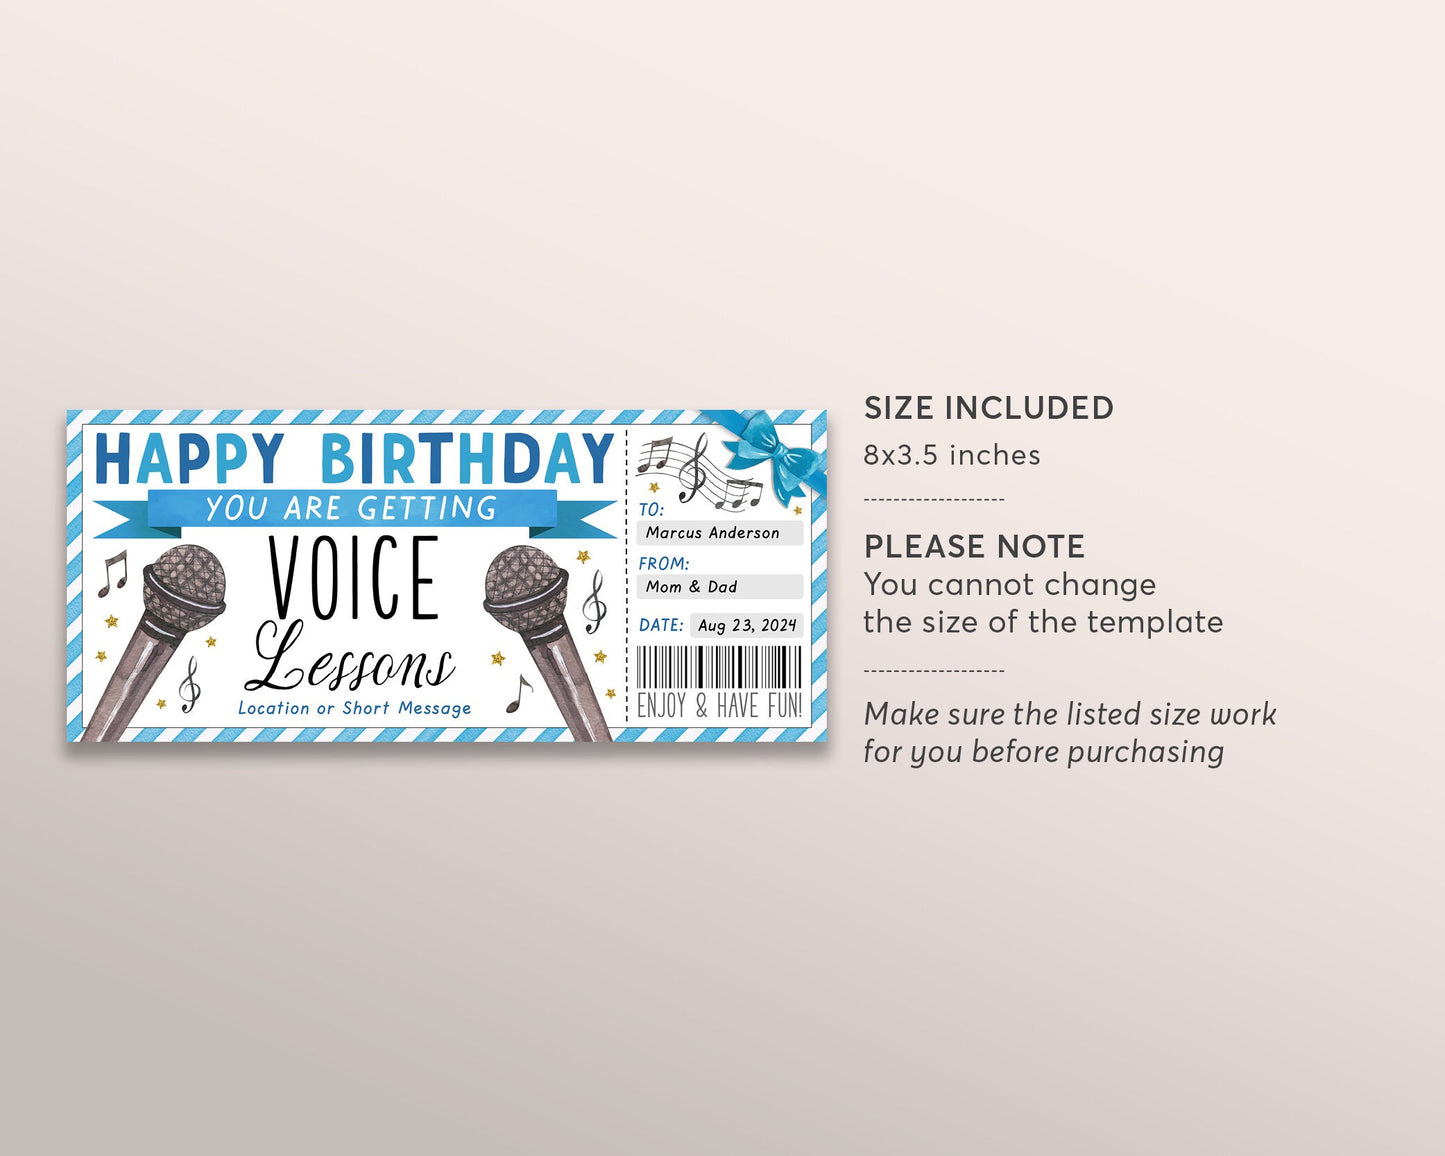 Voice Lessons Gift Certificate Editable Template, Birthday Singing Lessons Music Class Experience Voucher Reveal Coupon, Vocal Coaching